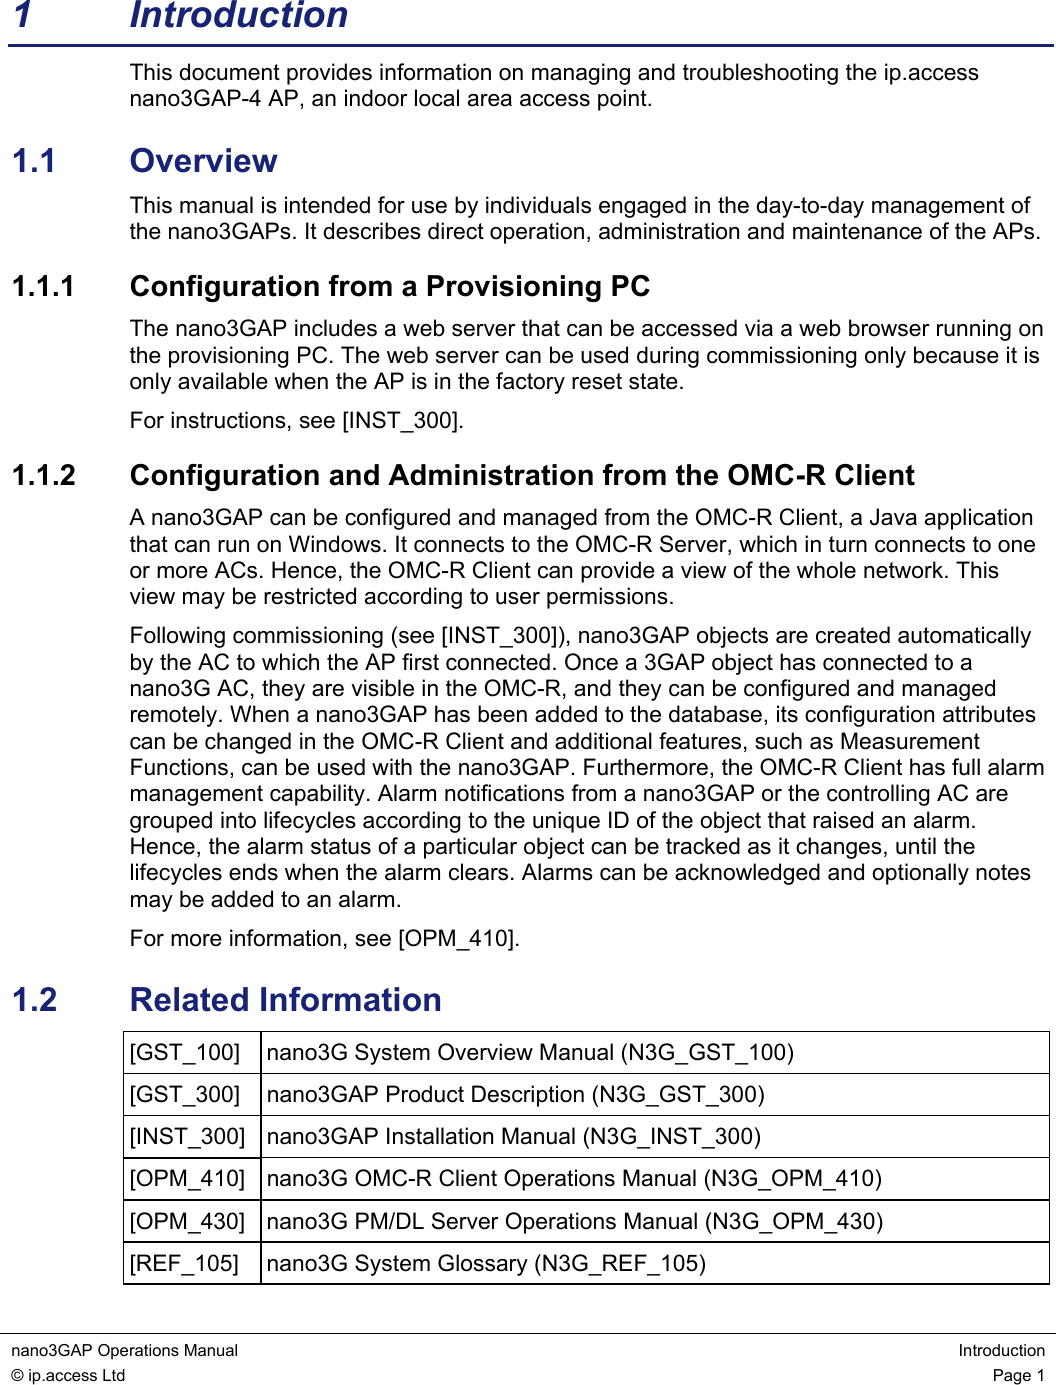 nano3GAP Operations Manual  Introduction © ip.access Ltd  Page 1  1 Introduction This document provides information on managing and troubleshooting the ip.access nano3GAP-4 AP, an indoor local area access point. 1.1  Overview This manual is intended for use by individuals engaged in the day-to-day management of the nano3GAPs. It describes direct operation, administration and maintenance of the APs. 1.1.1  Configuration from a Provisioning PC The nano3GAP includes a web server that can be accessed via a web browser running on the provisioning PC. The web server can be used during commissioning only because it is only available when the AP is in the factory reset state. For instructions, see [INST_300]. 1.1.2  Configuration and Administration from the OMC-R Client A nano3GAP can be configured and managed from the OMC-R Client, a Java application that can run on Windows. It connects to the OMC-R Server, which in turn connects to one or more ACs. Hence, the OMC-R Client can provide a view of the whole network. This view may be restricted according to user permissions. Following commissioning (see [INST_300]), nano3GAP objects are created automatically by the AC to which the AP first connected. Once a 3GAP object has connected to a nano3G AC, they are visible in the OMC-R, and they can be configured and managed remotely. When a nano3GAP has been added to the database, its configuration attributes can be changed in the OMC-R Client and additional features, such as Measurement Functions, can be used with the nano3GAP. Furthermore, the OMC-R Client has full alarm management capability. Alarm notifications from a nano3GAP or the controlling AC are grouped into lifecycles according to the unique ID of the object that raised an alarm. Hence, the alarm status of a particular object can be tracked as it changes, until the lifecycles ends when the alarm clears. Alarms can be acknowledged and optionally notes may be added to an alarm. For more information, see [OPM_410]. 1.2  Related Information [GST_100]  nano3G System Overview Manual (N3G_GST_100) [GST_300]  nano3GAP Product Description (N3G_GST_300) [INST_300]  nano3GAP Installation Manual (N3G_INST_300) [OPM_410]  nano3G OMC-R Client Operations Manual (N3G_OPM_410) [OPM_430]  nano3G PM/DL Server Operations Manual (N3G_OPM_430) [REF_105]  nano3G System Glossary (N3G_REF_105) 